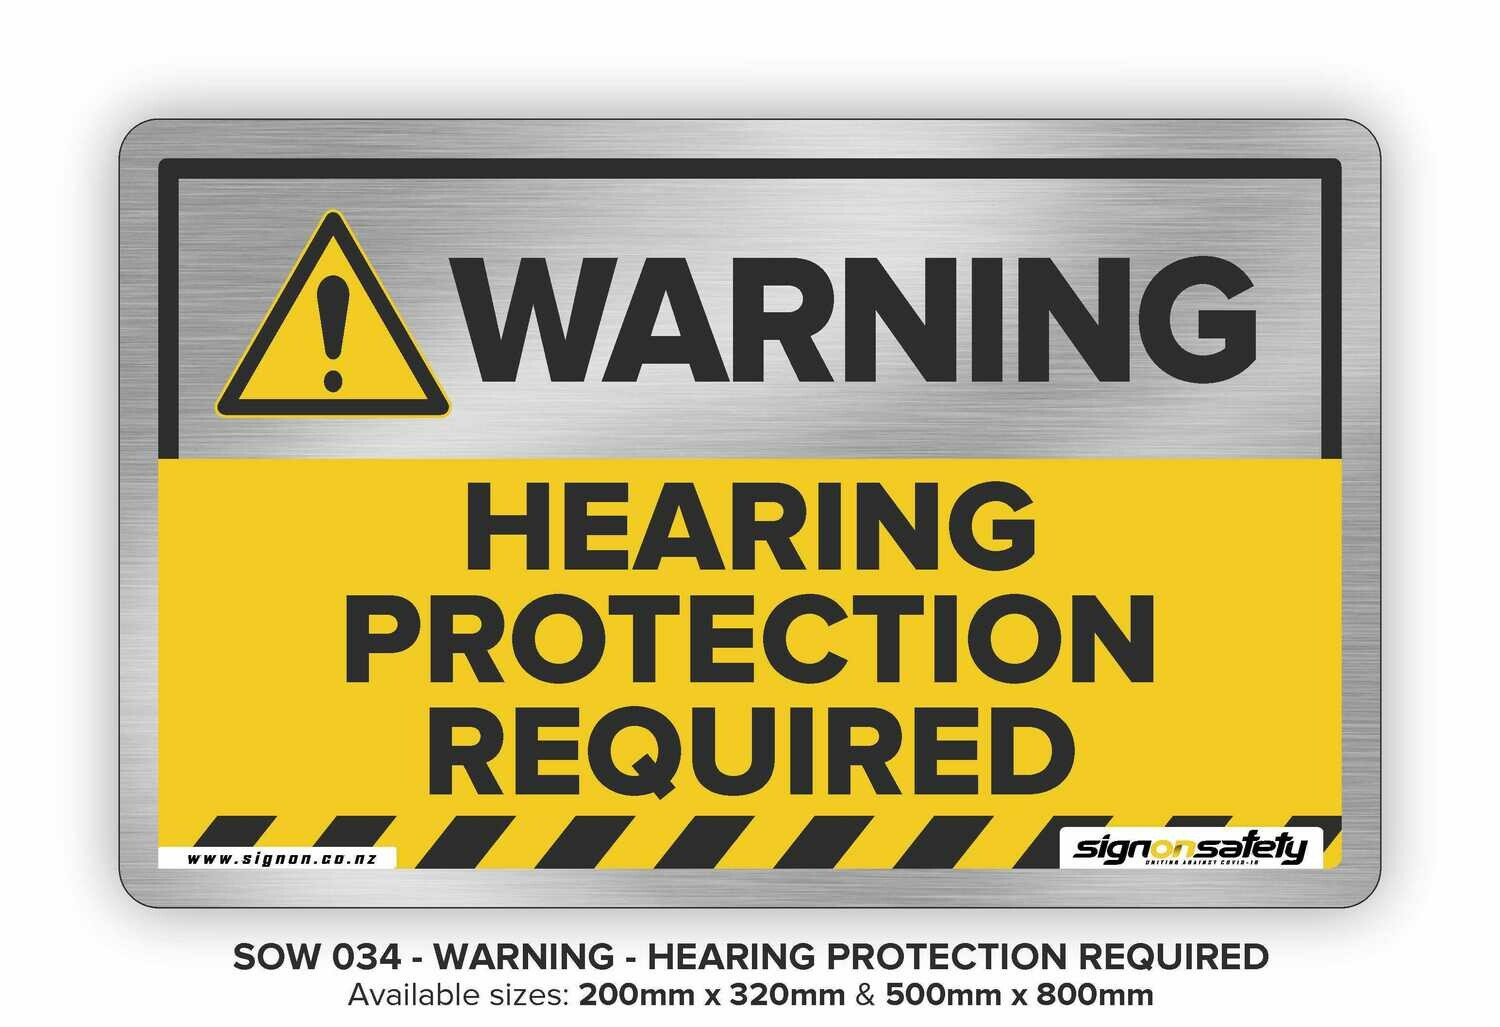 Warning - Hearing Protection Required